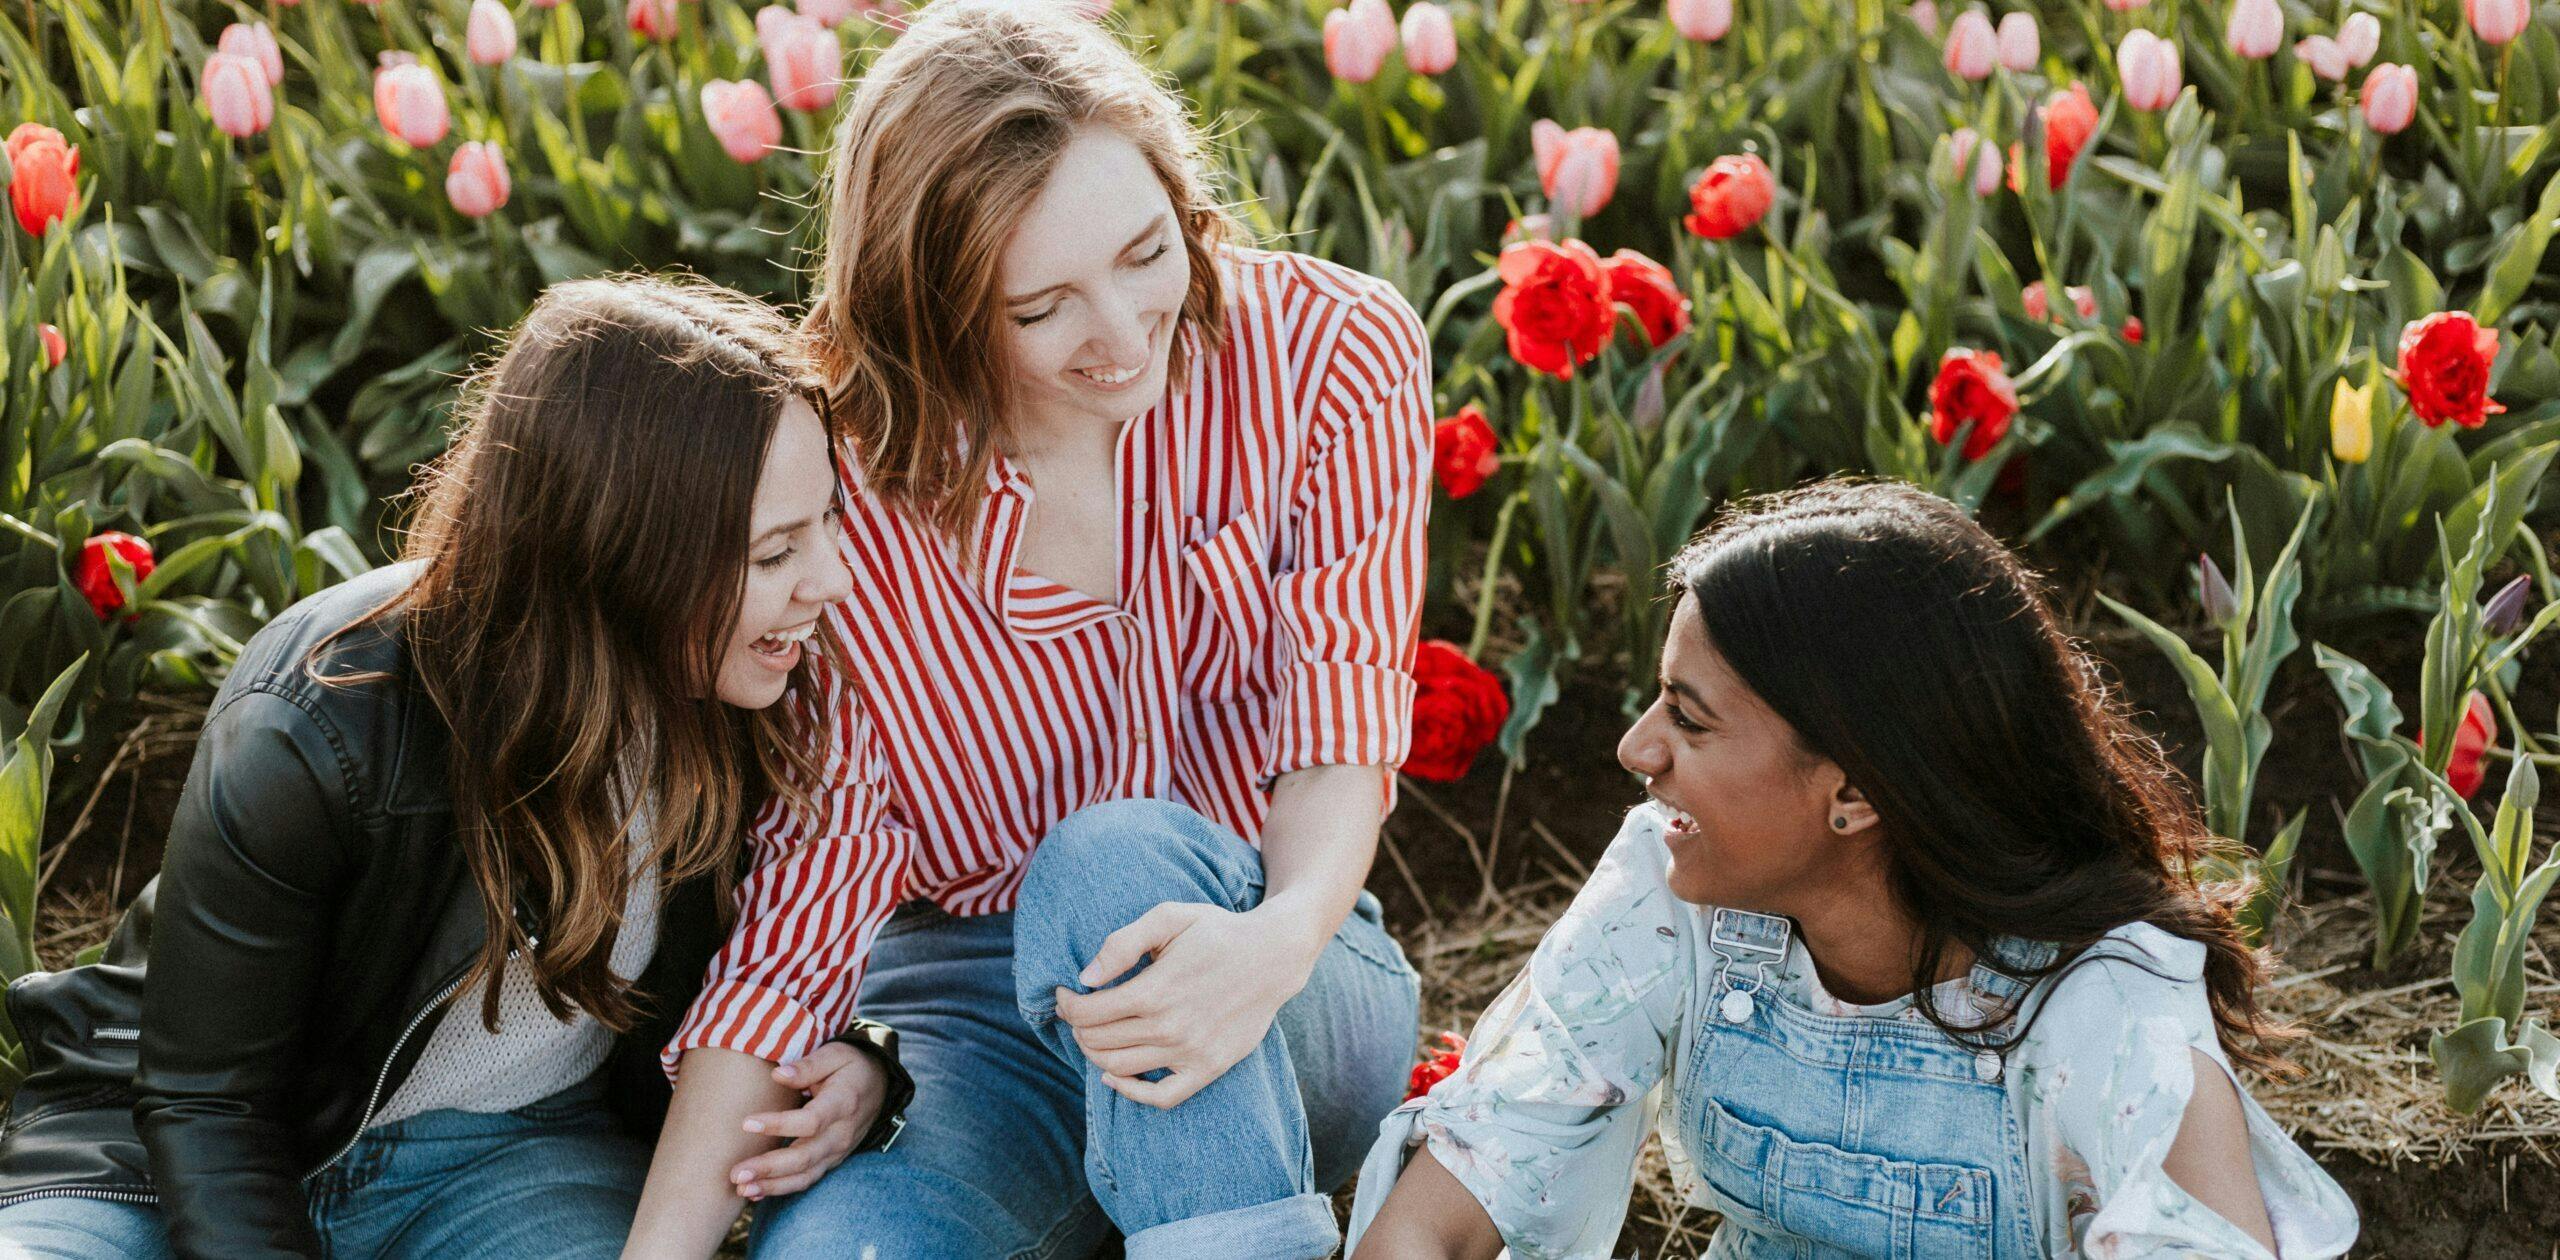 Three young women in a flower field, laughing.